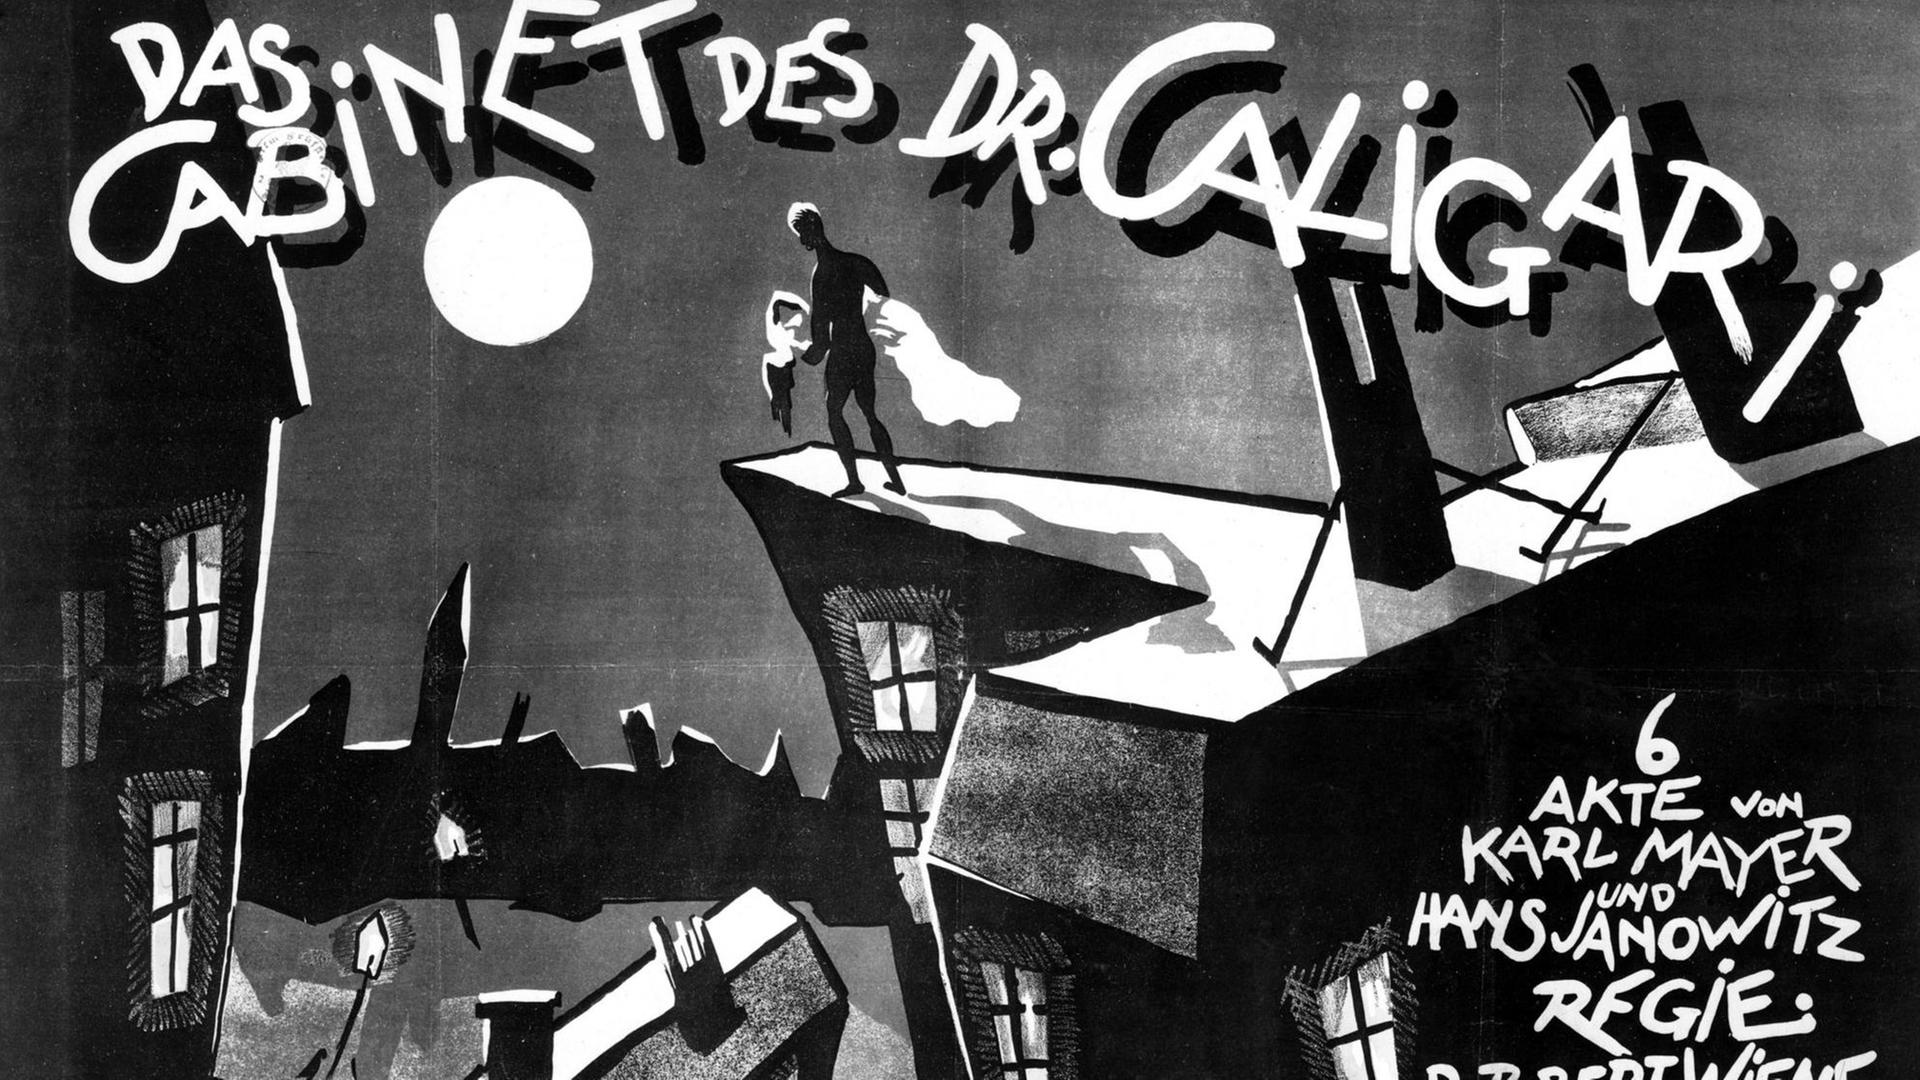 THE CABINET OF DR. CALIGARI, (aka THE CABINET OF DOCTOR CALIGARI, aka DAS CABINET DES DR. CALIGARI), 1920 | Keine Weitergabe an Wiederverkäufer.